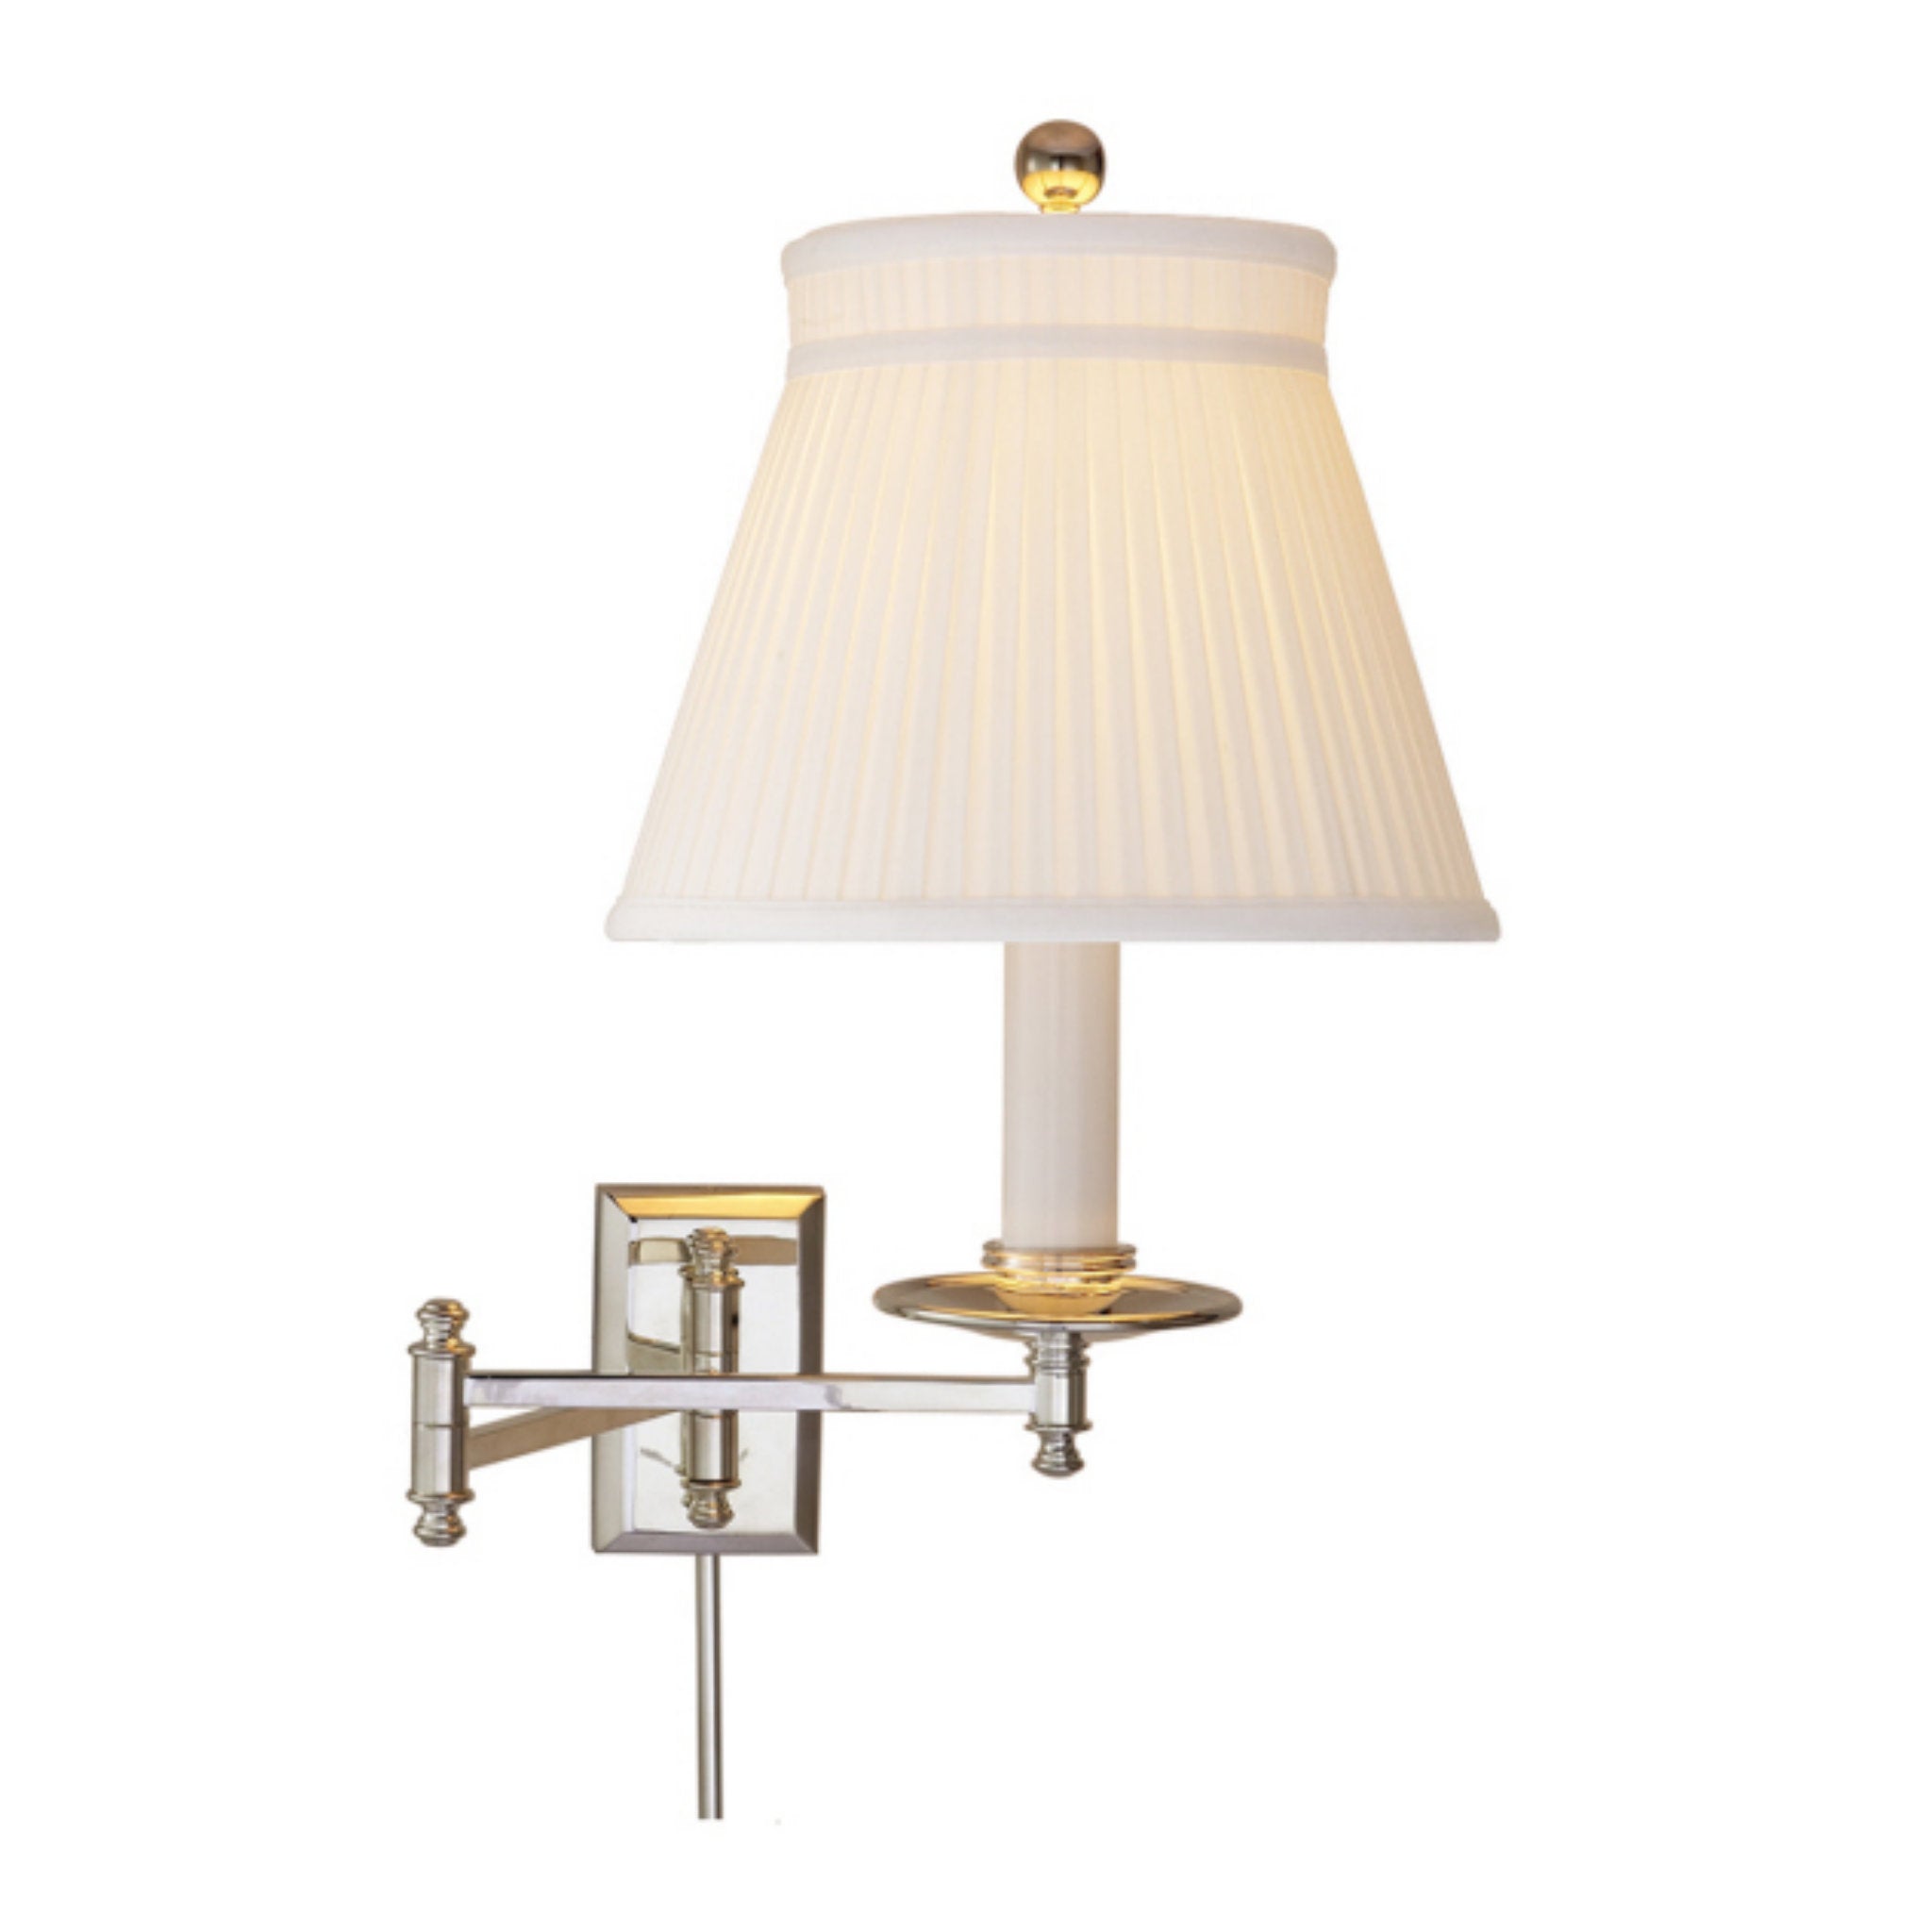 Chapman & Myers Dorchester Swing Arm in Polished Nickel with Silk Crown Shade